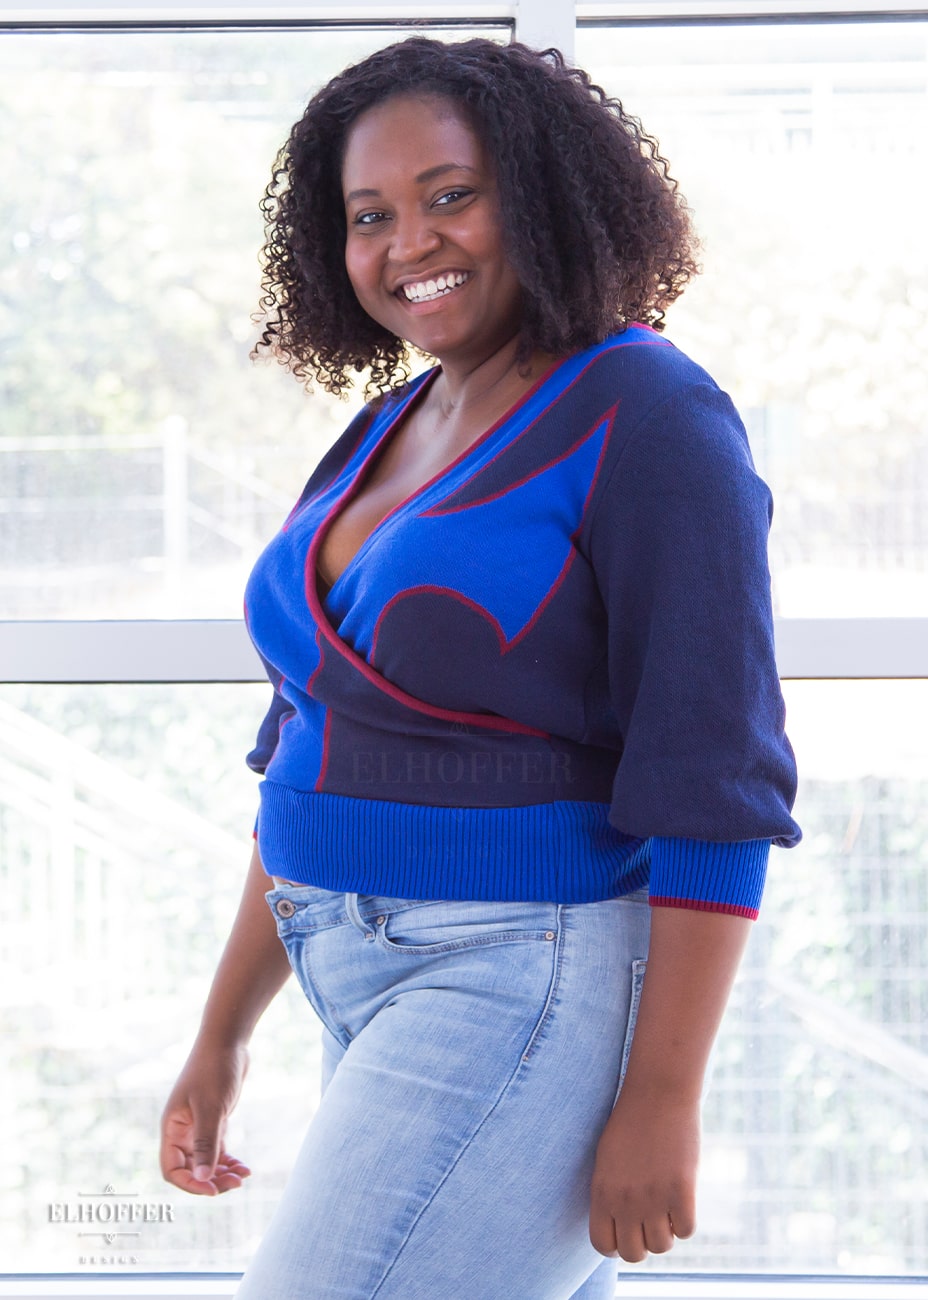 Maydelle, a medium dark skinned size XL model with shoulder length curly brown hair, is wearing a crossover knit crop top. The base is a dark blue, details are bright blue with a red outline and form almost a t shape in the middle of the crop. The cuffs and bottom are the same bright blue of the detail and the crossover is piped in the same red.